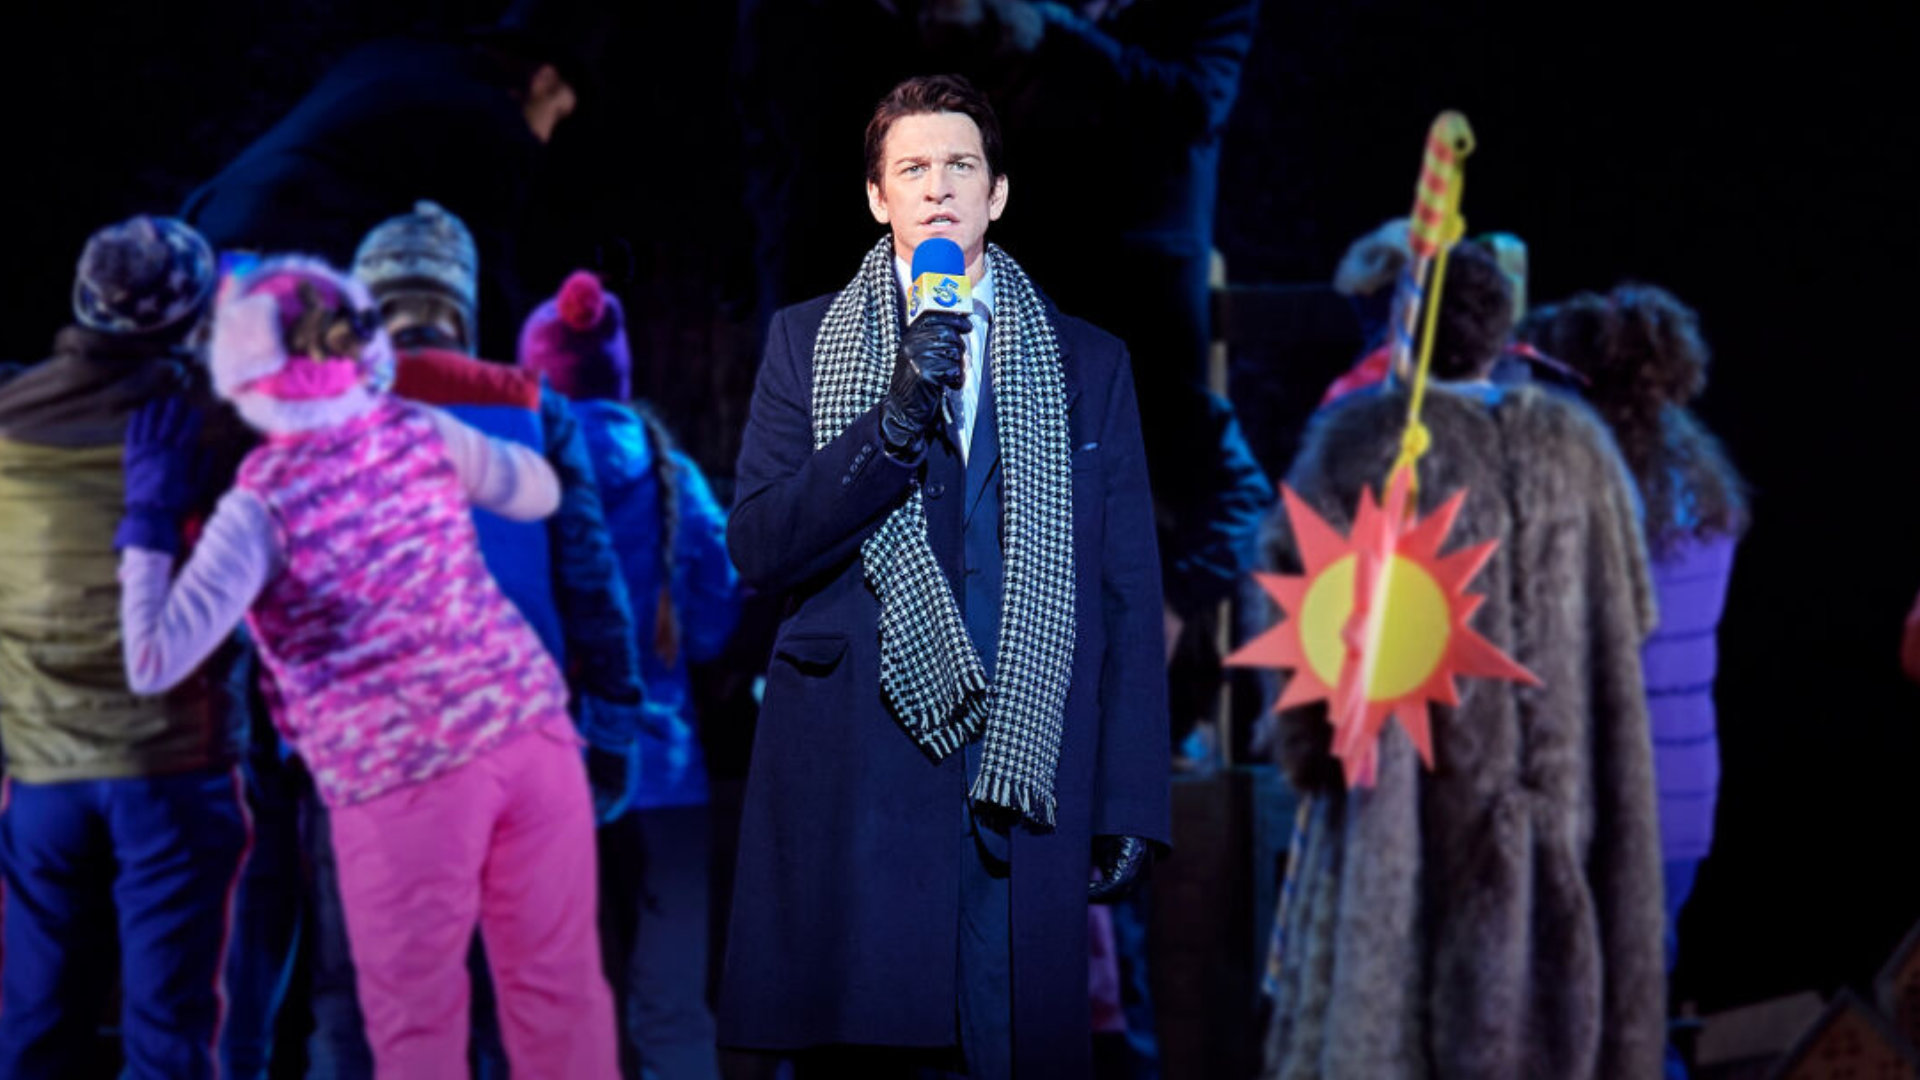 Groundhog Day musical returns to London with new run at the Old Vic in